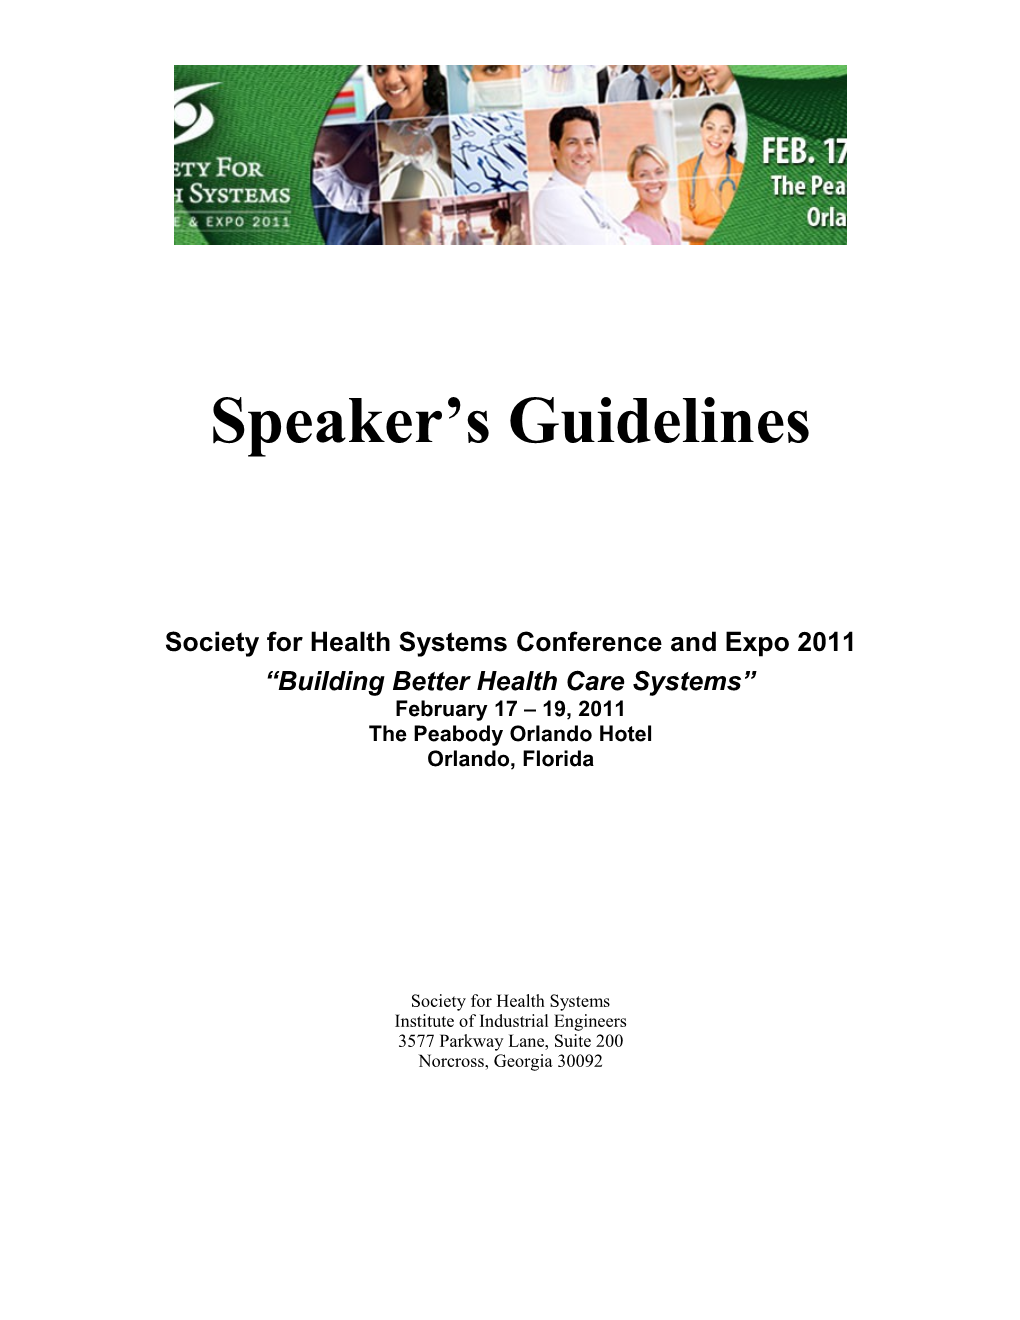 Society for Health Systemsconference and Expo 2011